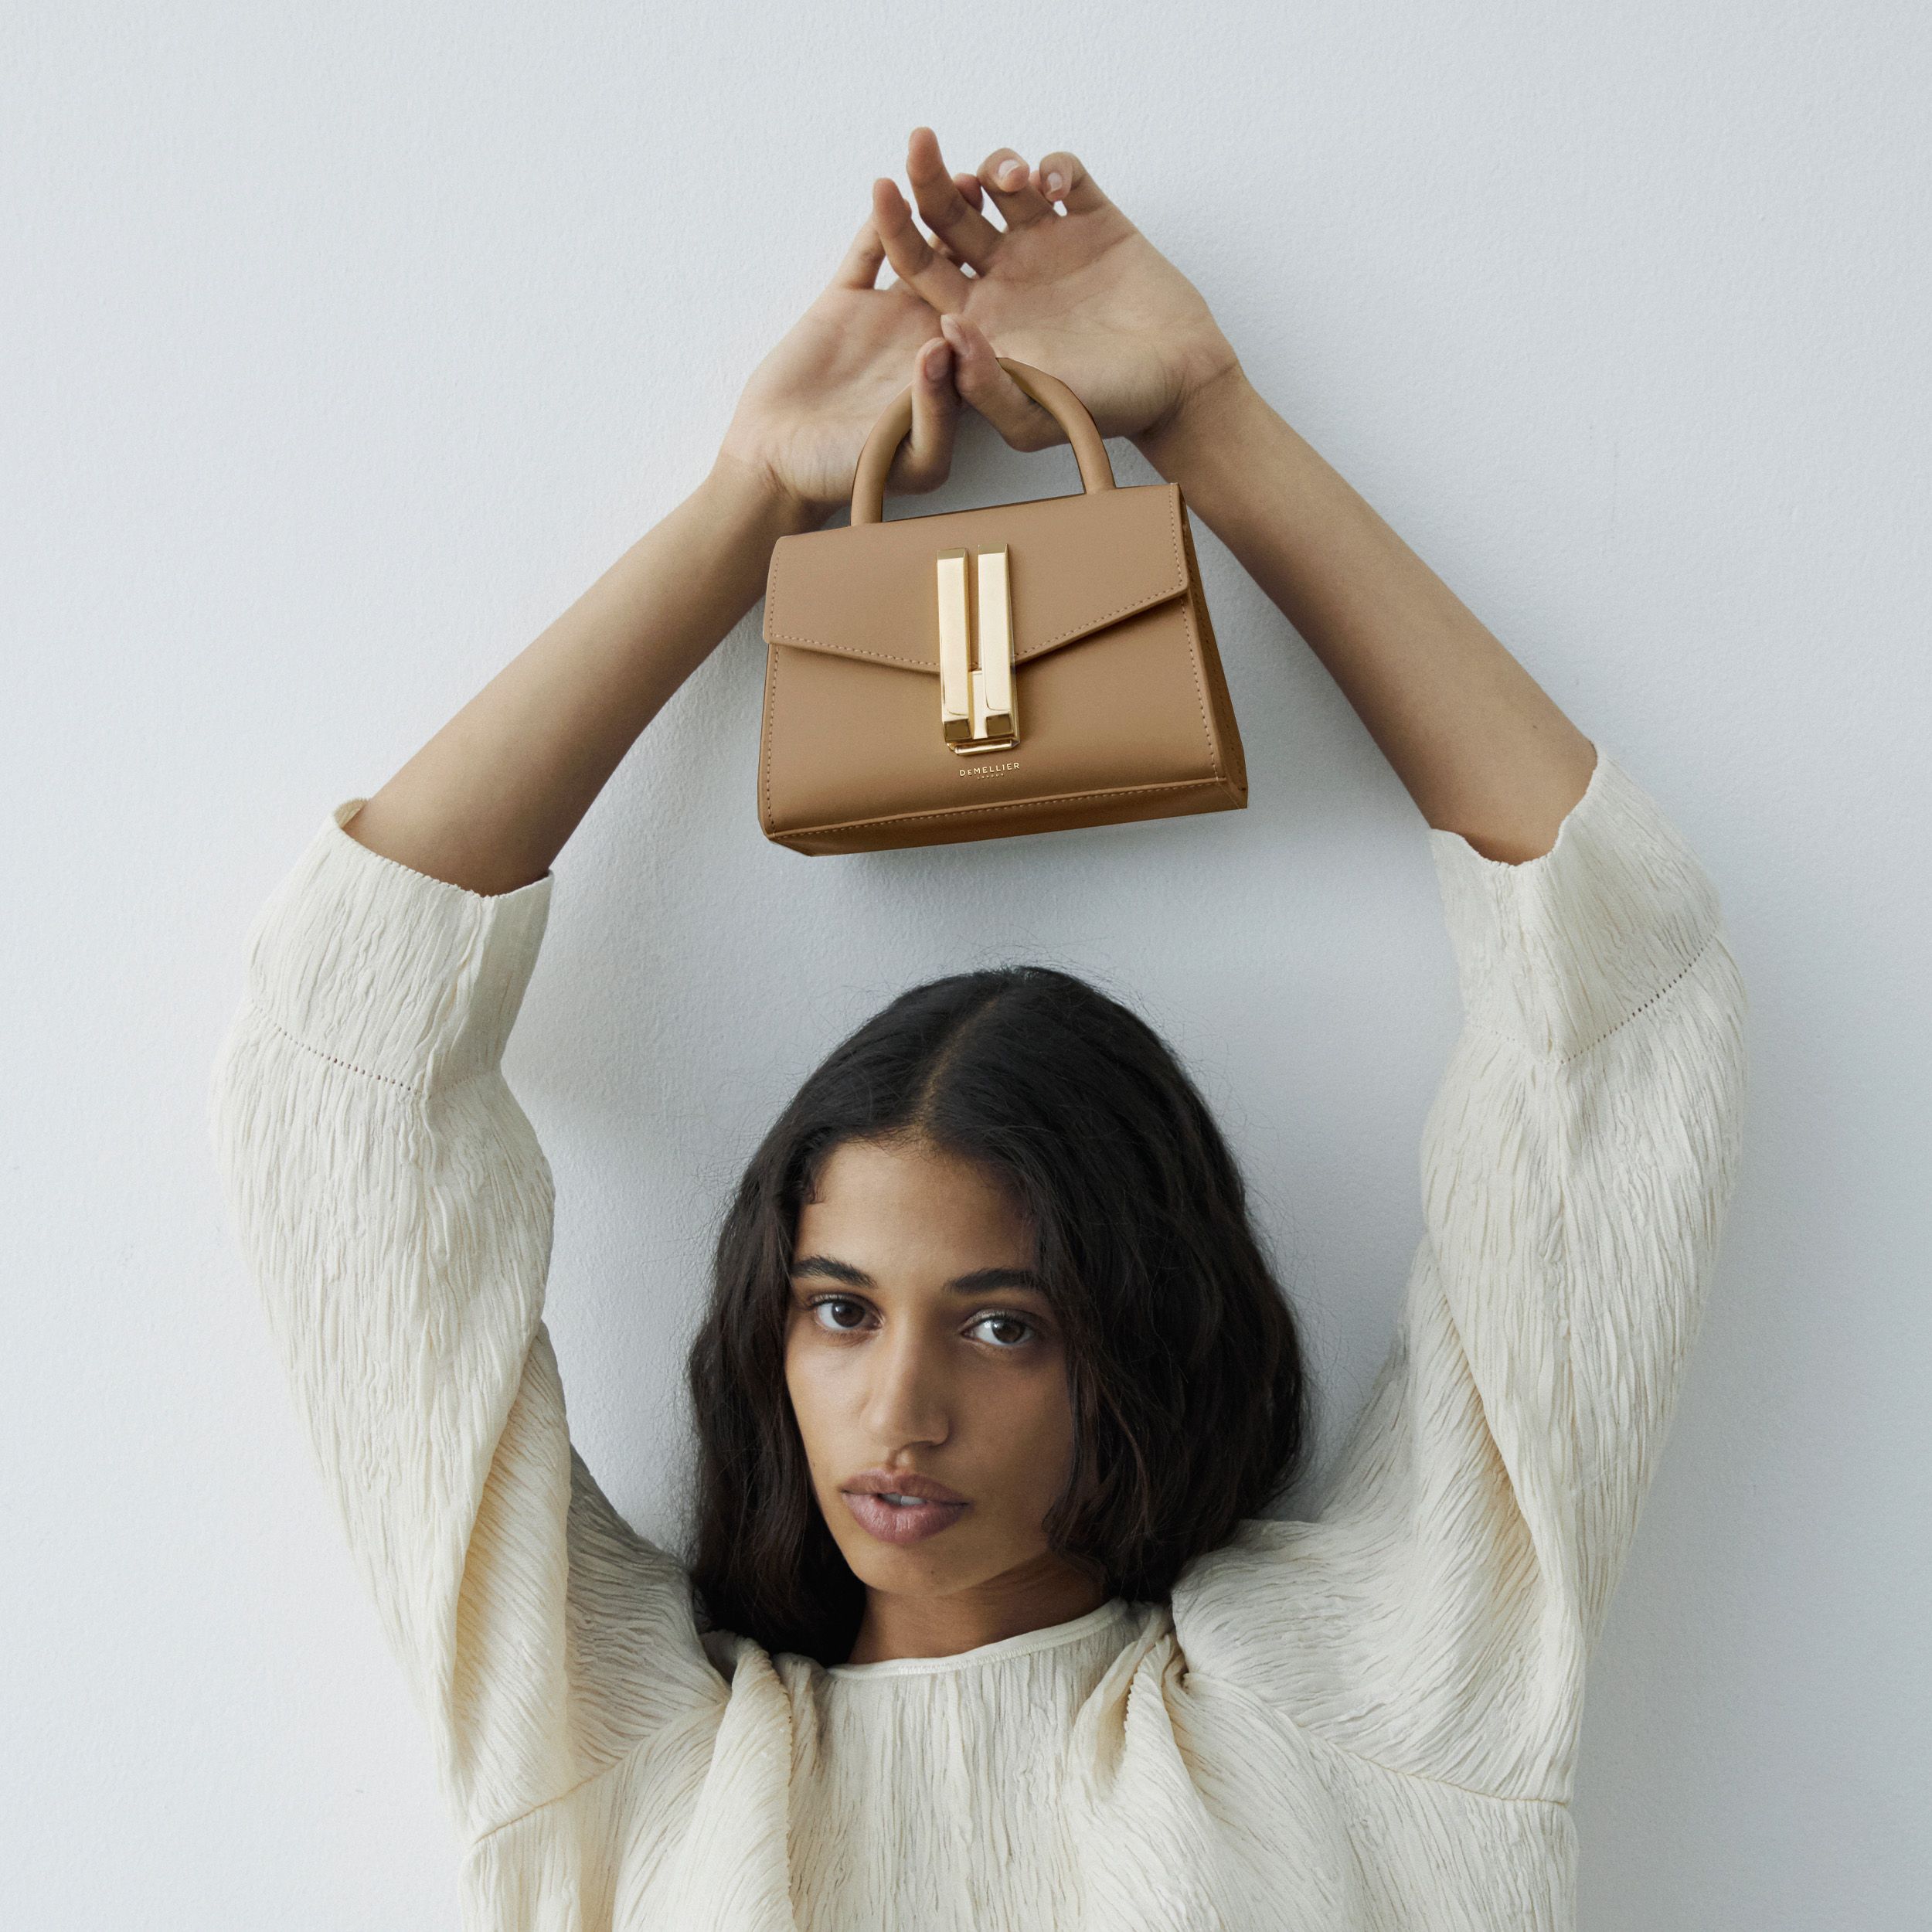 Model posing, holding the toffee Demellier handbag above her head.  Model is wearing a white top. 